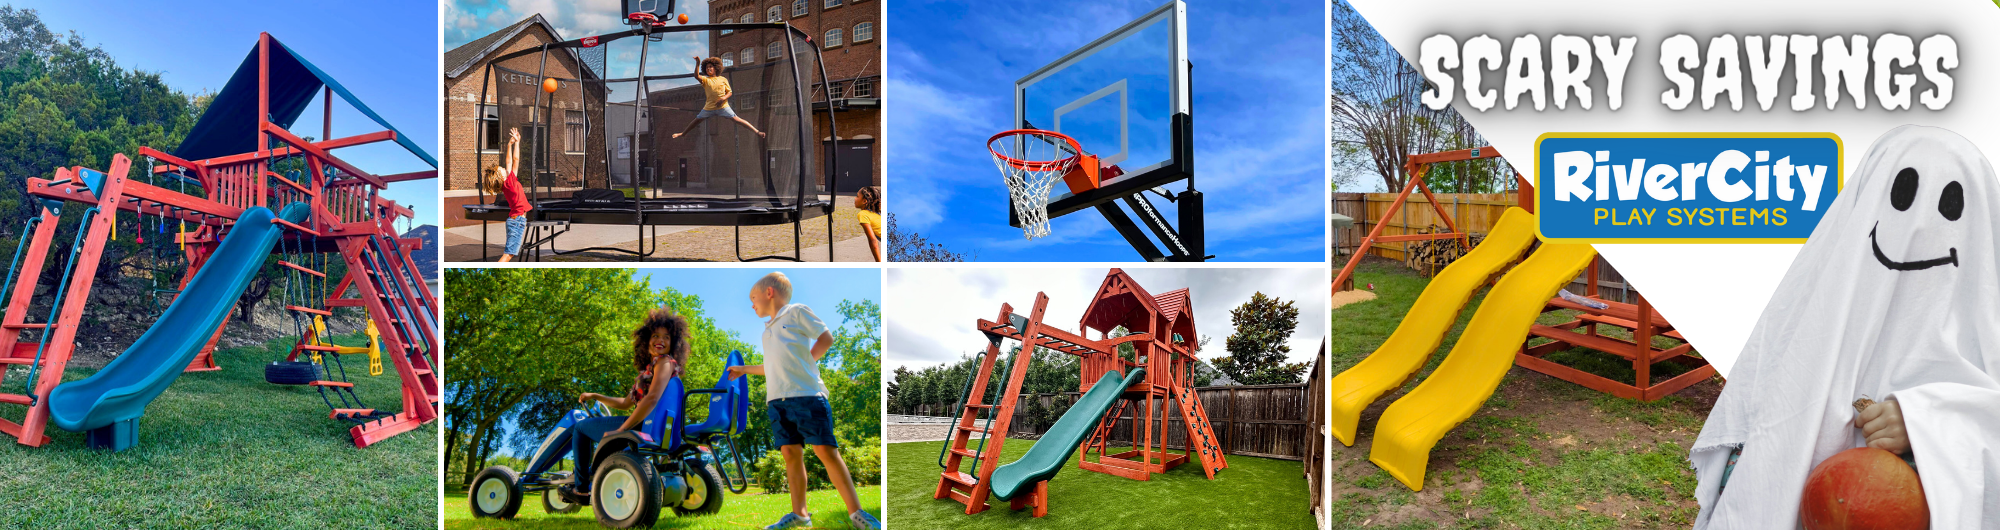 Scary Savings on Swing Sets, Playsets, Trampolines, Hoops, and more!